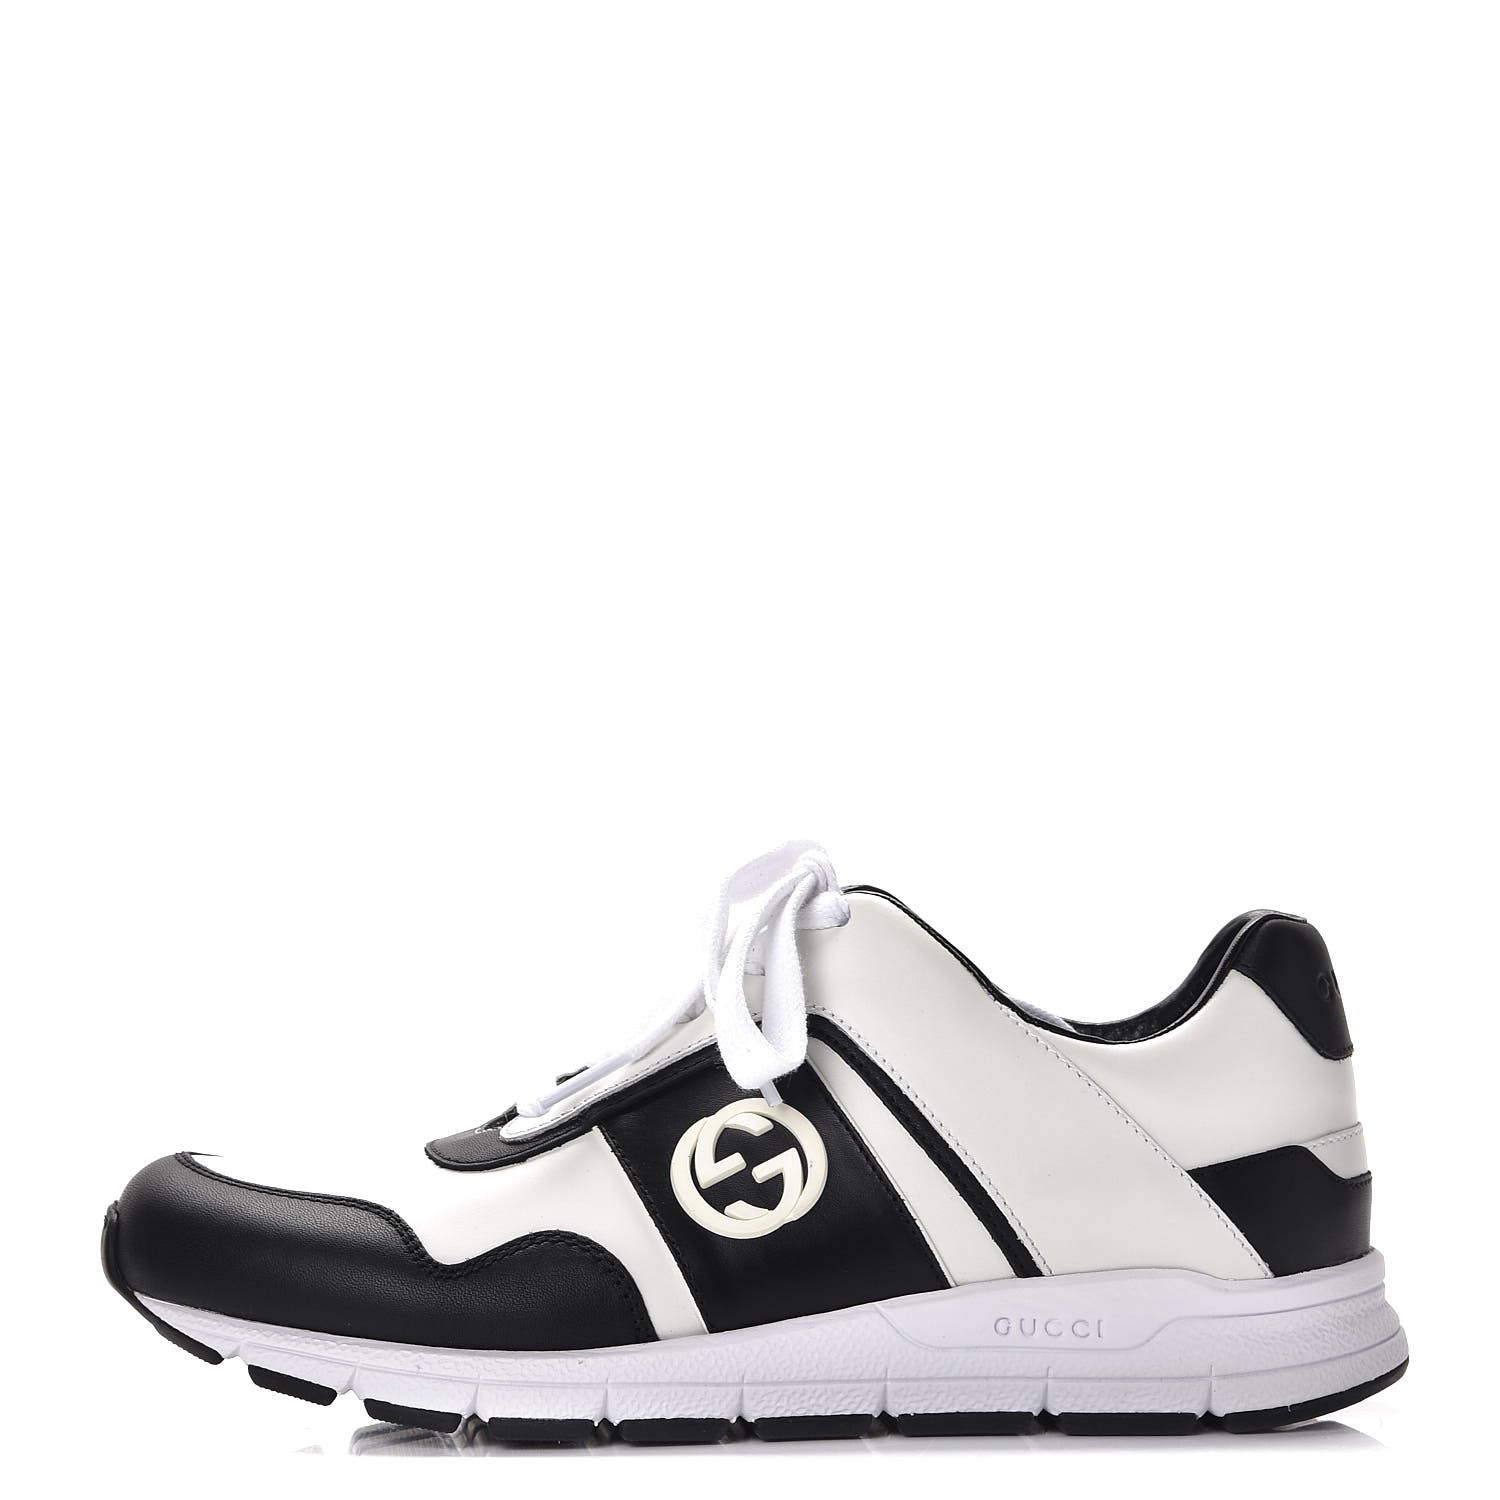 gucci black and white sneakers